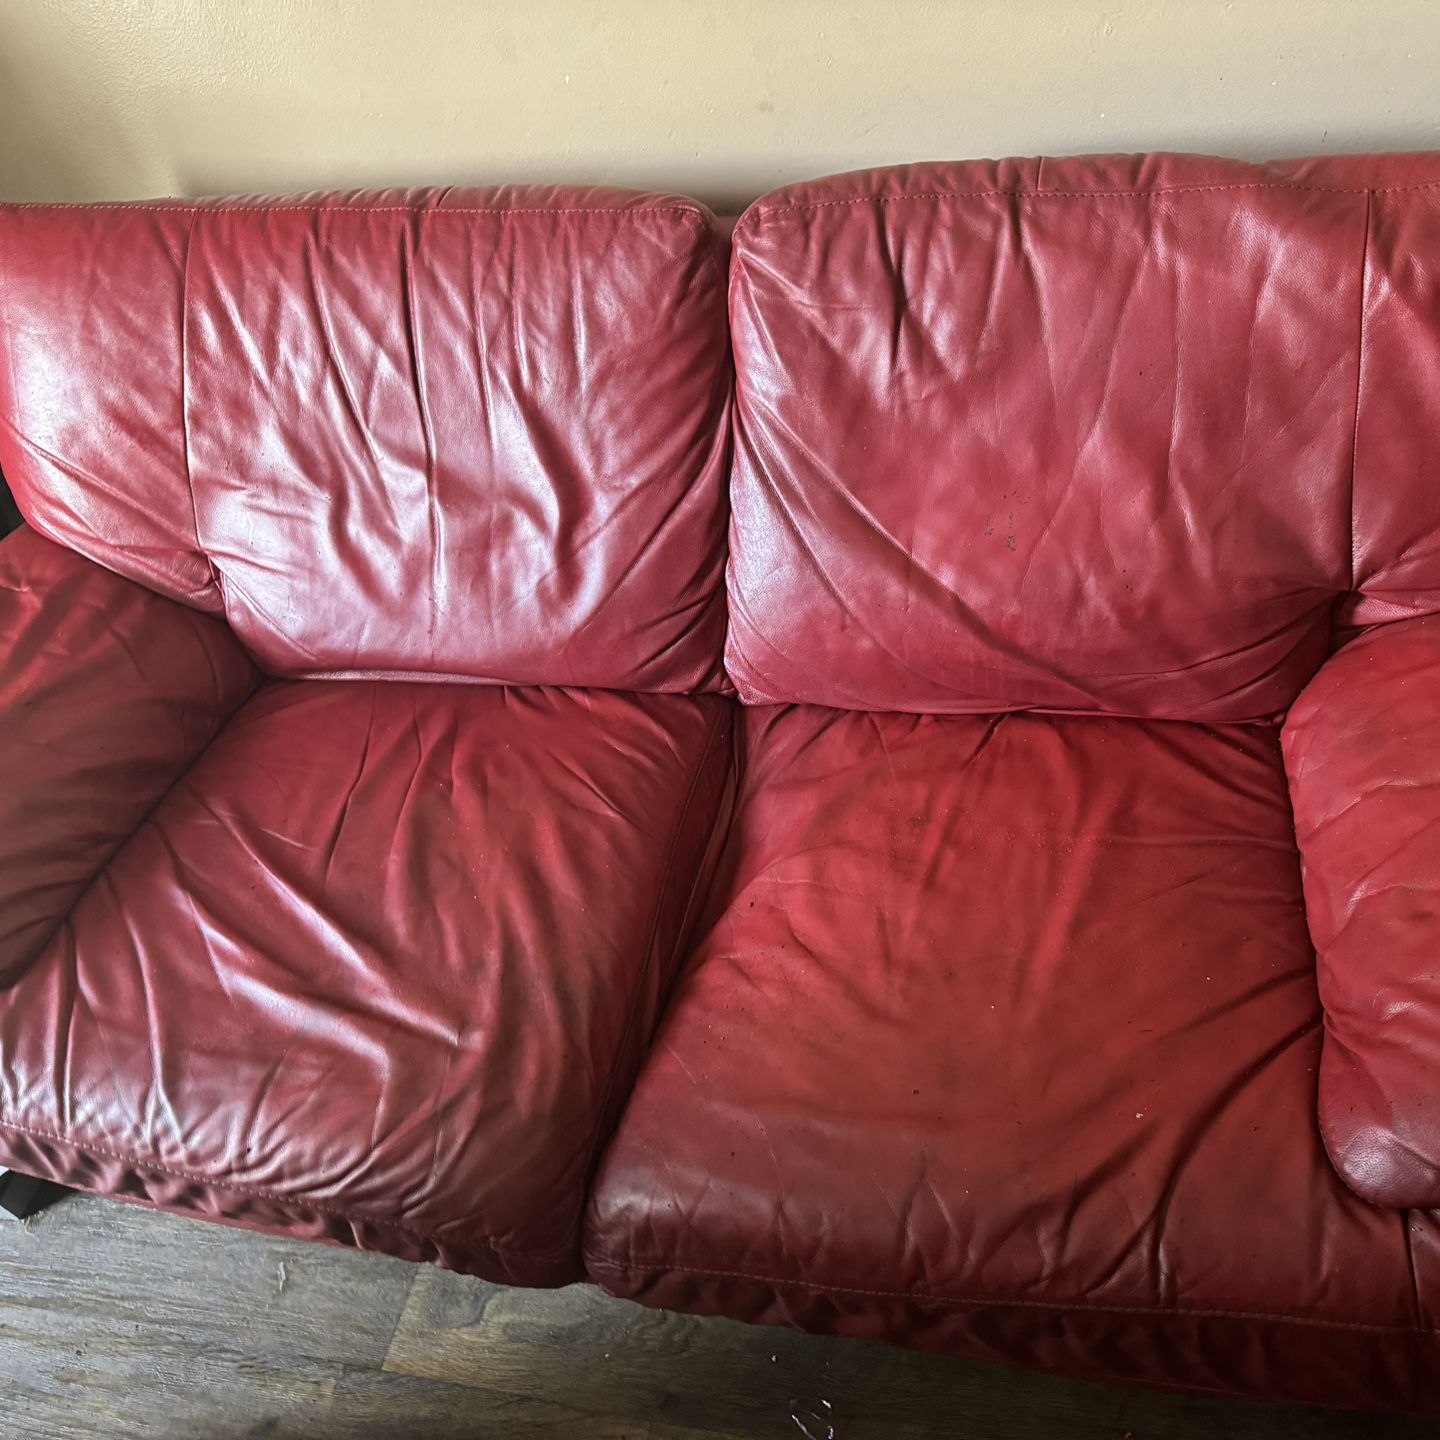 Used Couches Still In Good Condition Just Need GONE ASAP BY April 1